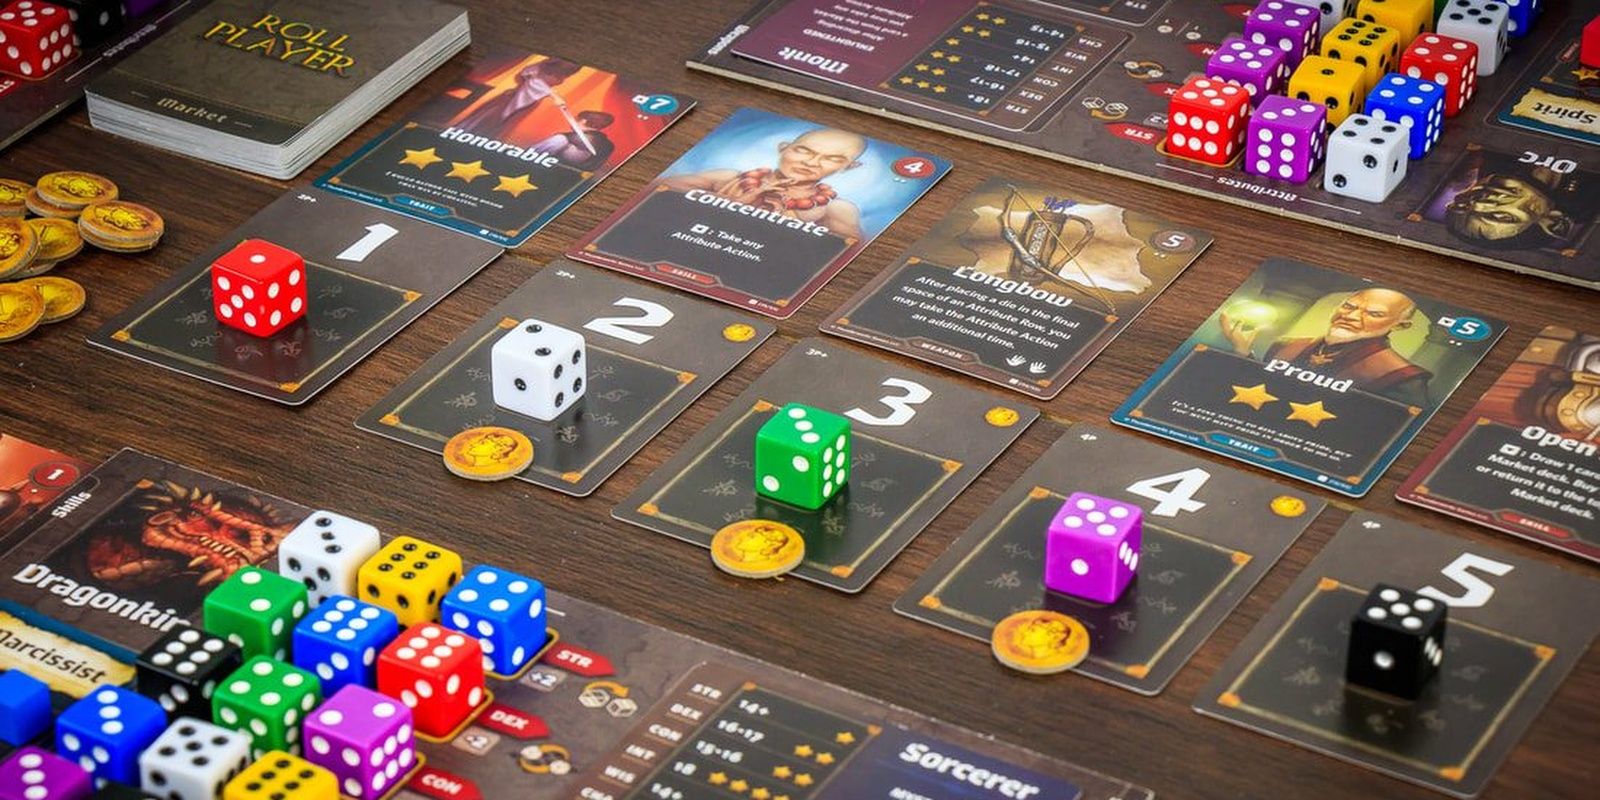 Roll Player Board Game Setup On Table Being Played